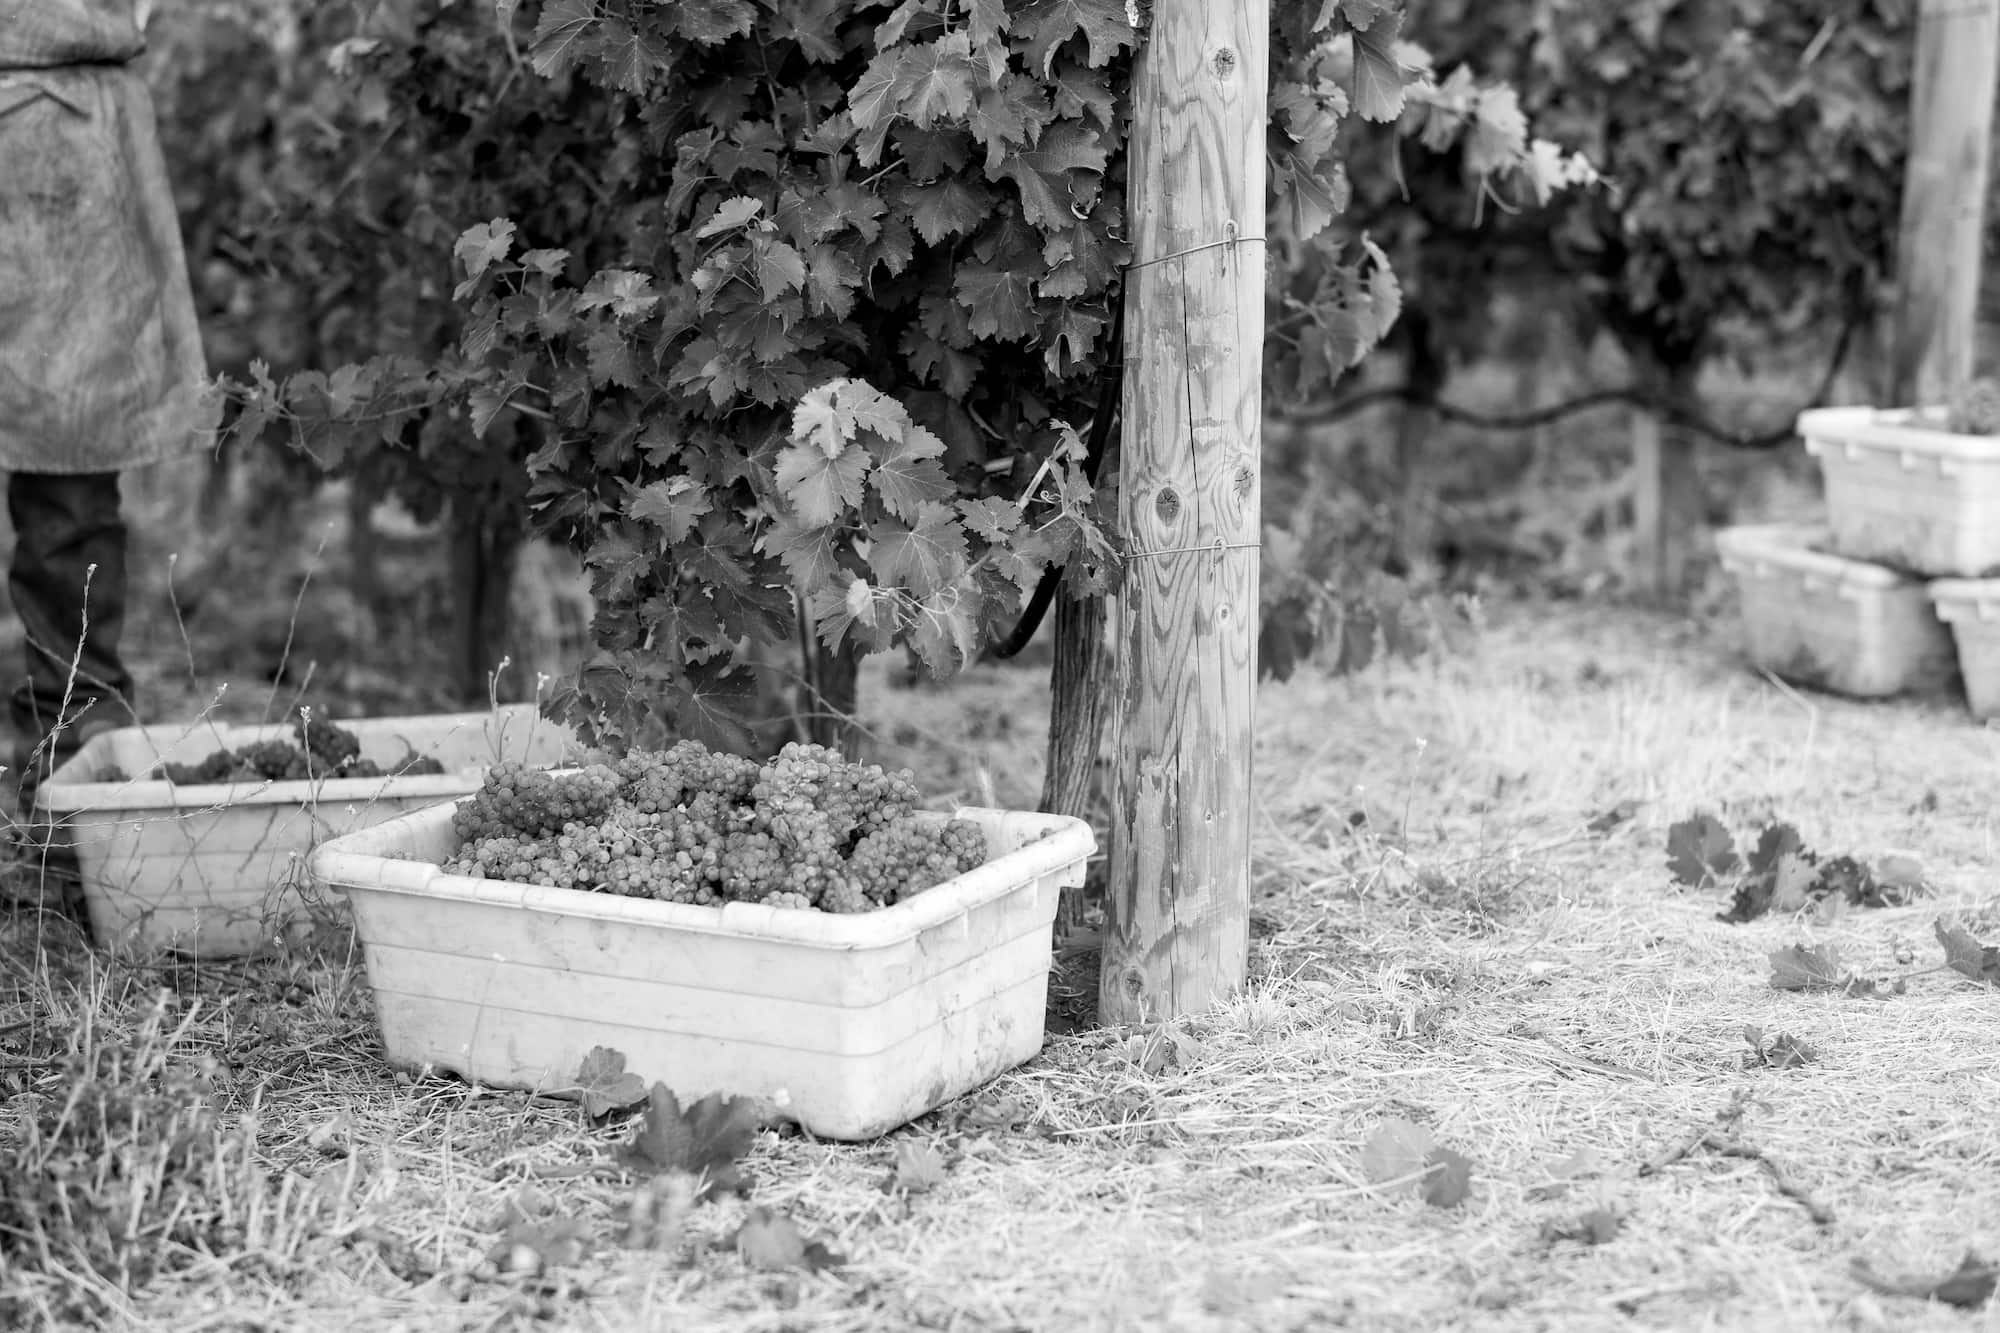 A bin of picked wine grapes under a vine during the winemaking process